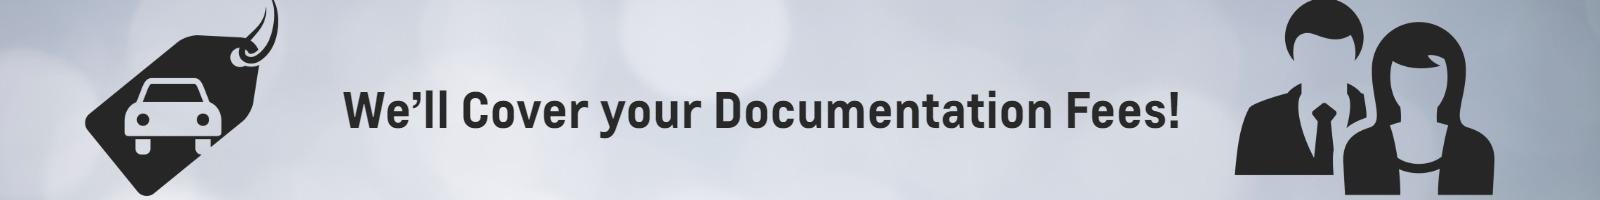 We’ll Cover your Documentation Fees!